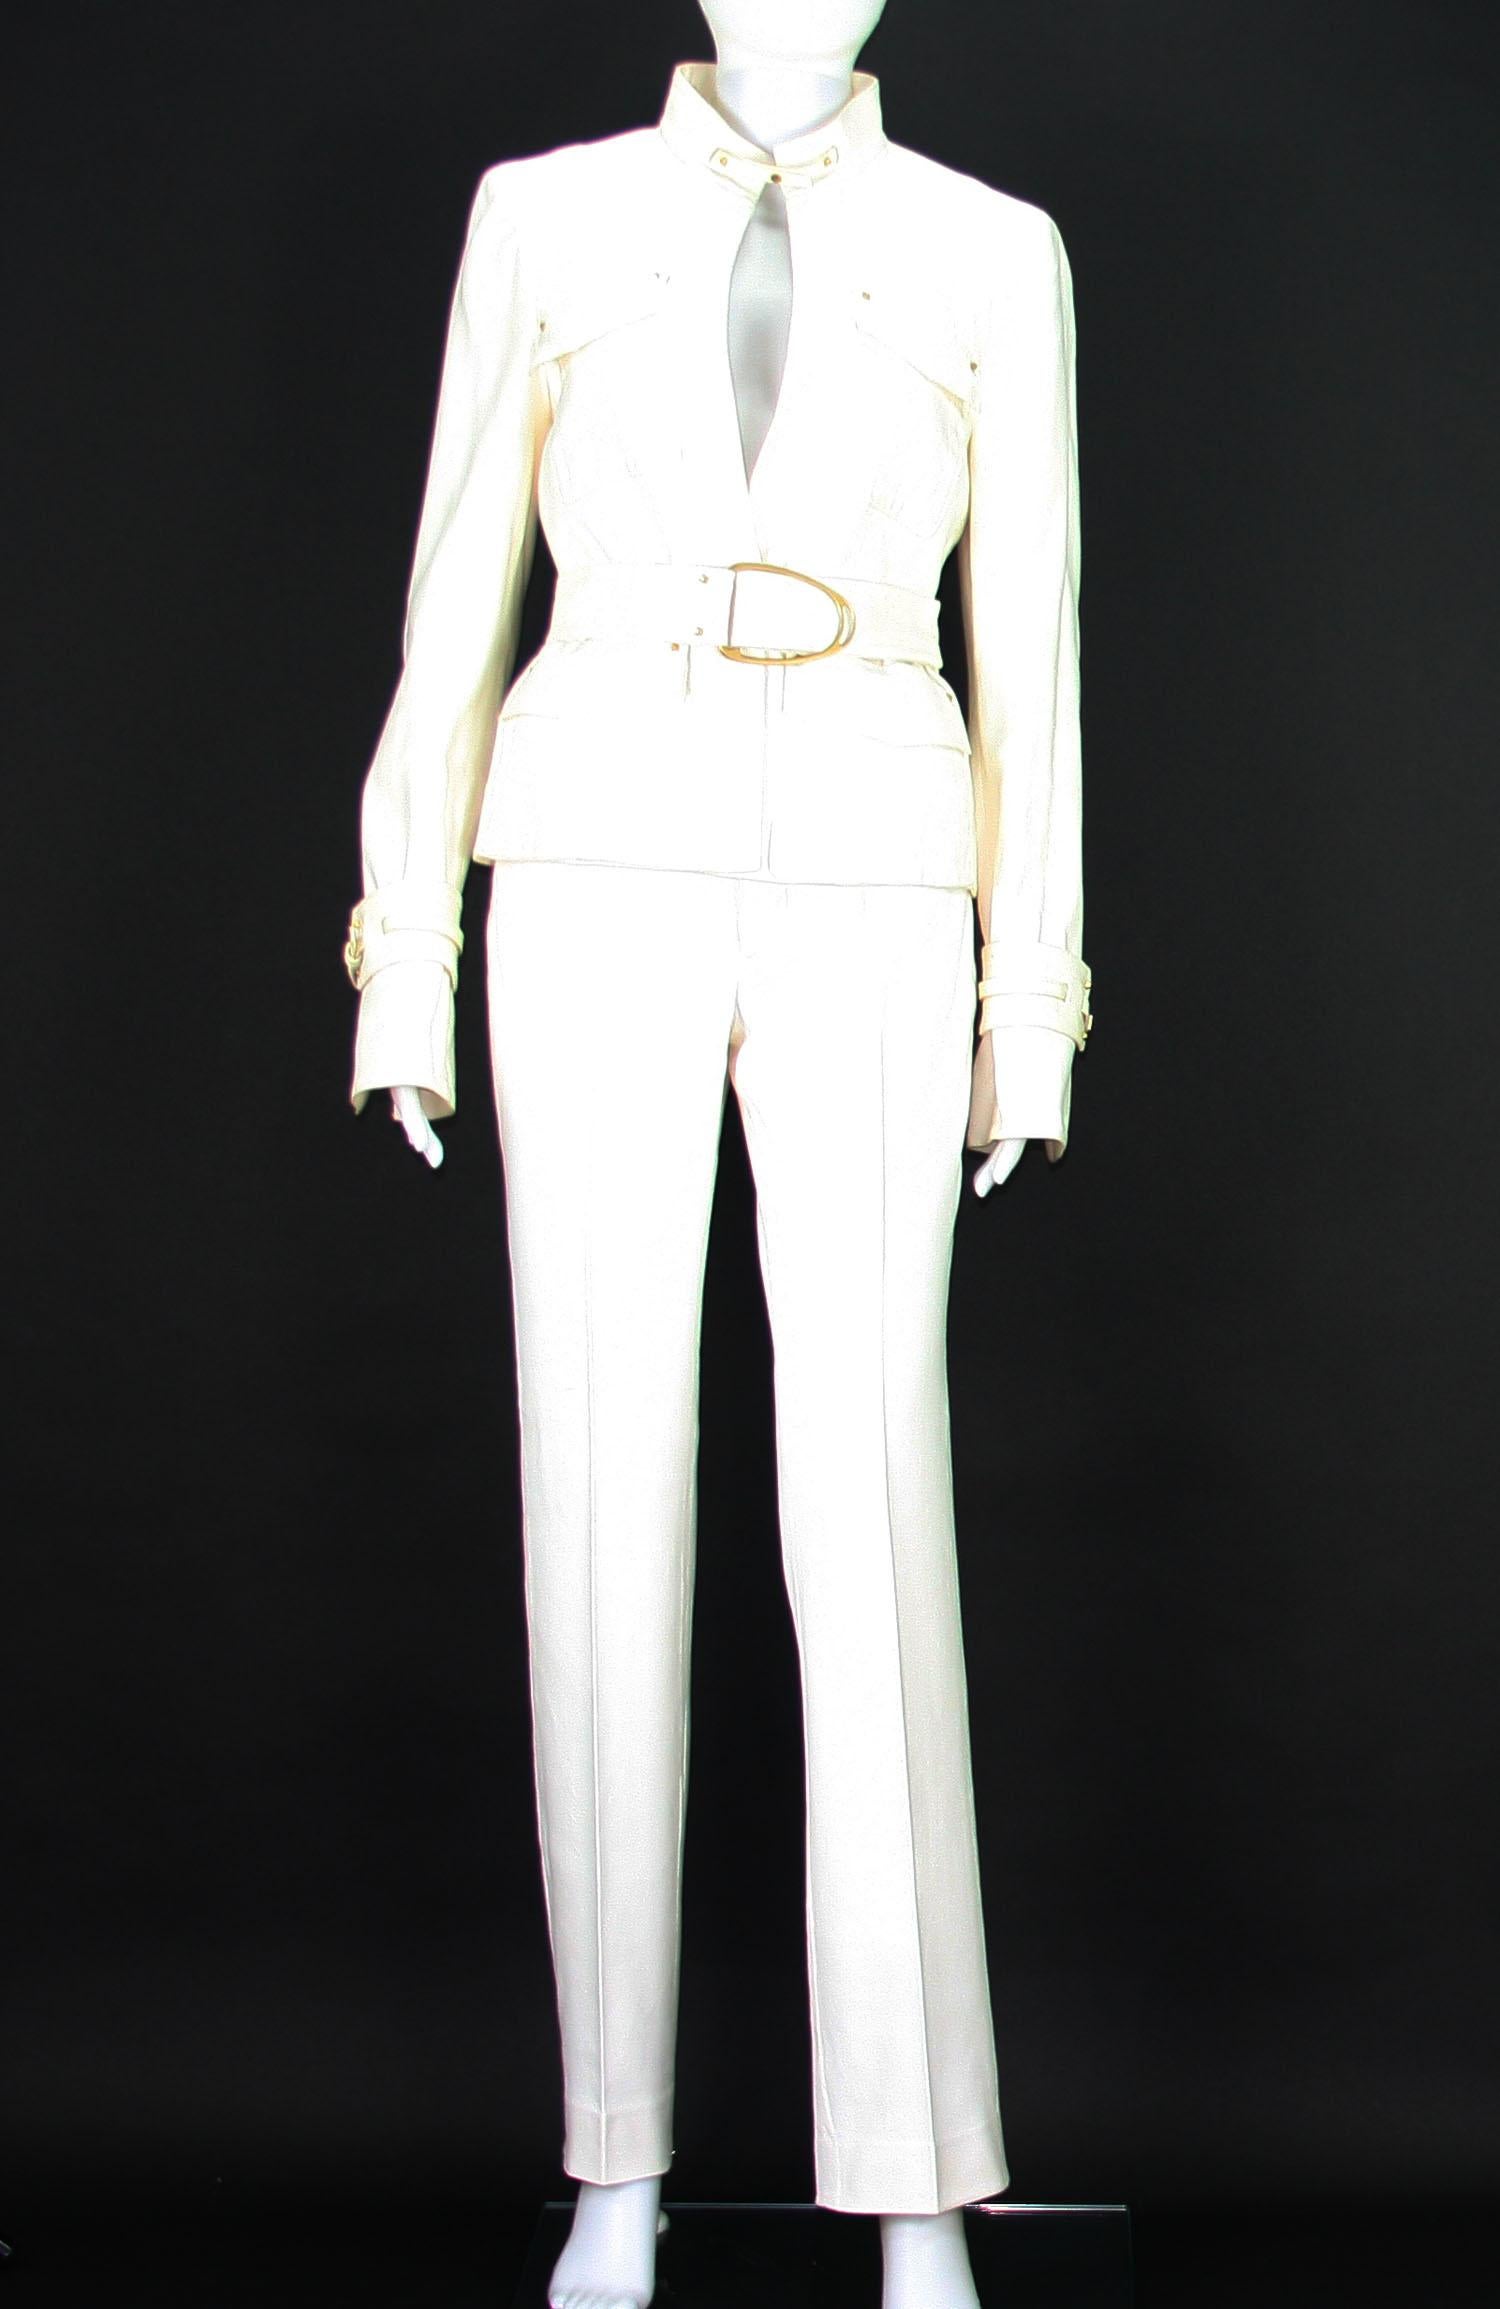 Tom Ford for Gucci Safari White Cotton Silk Pant Suit - Very Rare
Italian size 44
2003 Collection
87% Cotton, 13% Silk.
Jacket - Safari Style, Four Pockets, Detachable D-Ring Belt, Adjustable Leather Straps, Gold-tone Metal Details, Padded